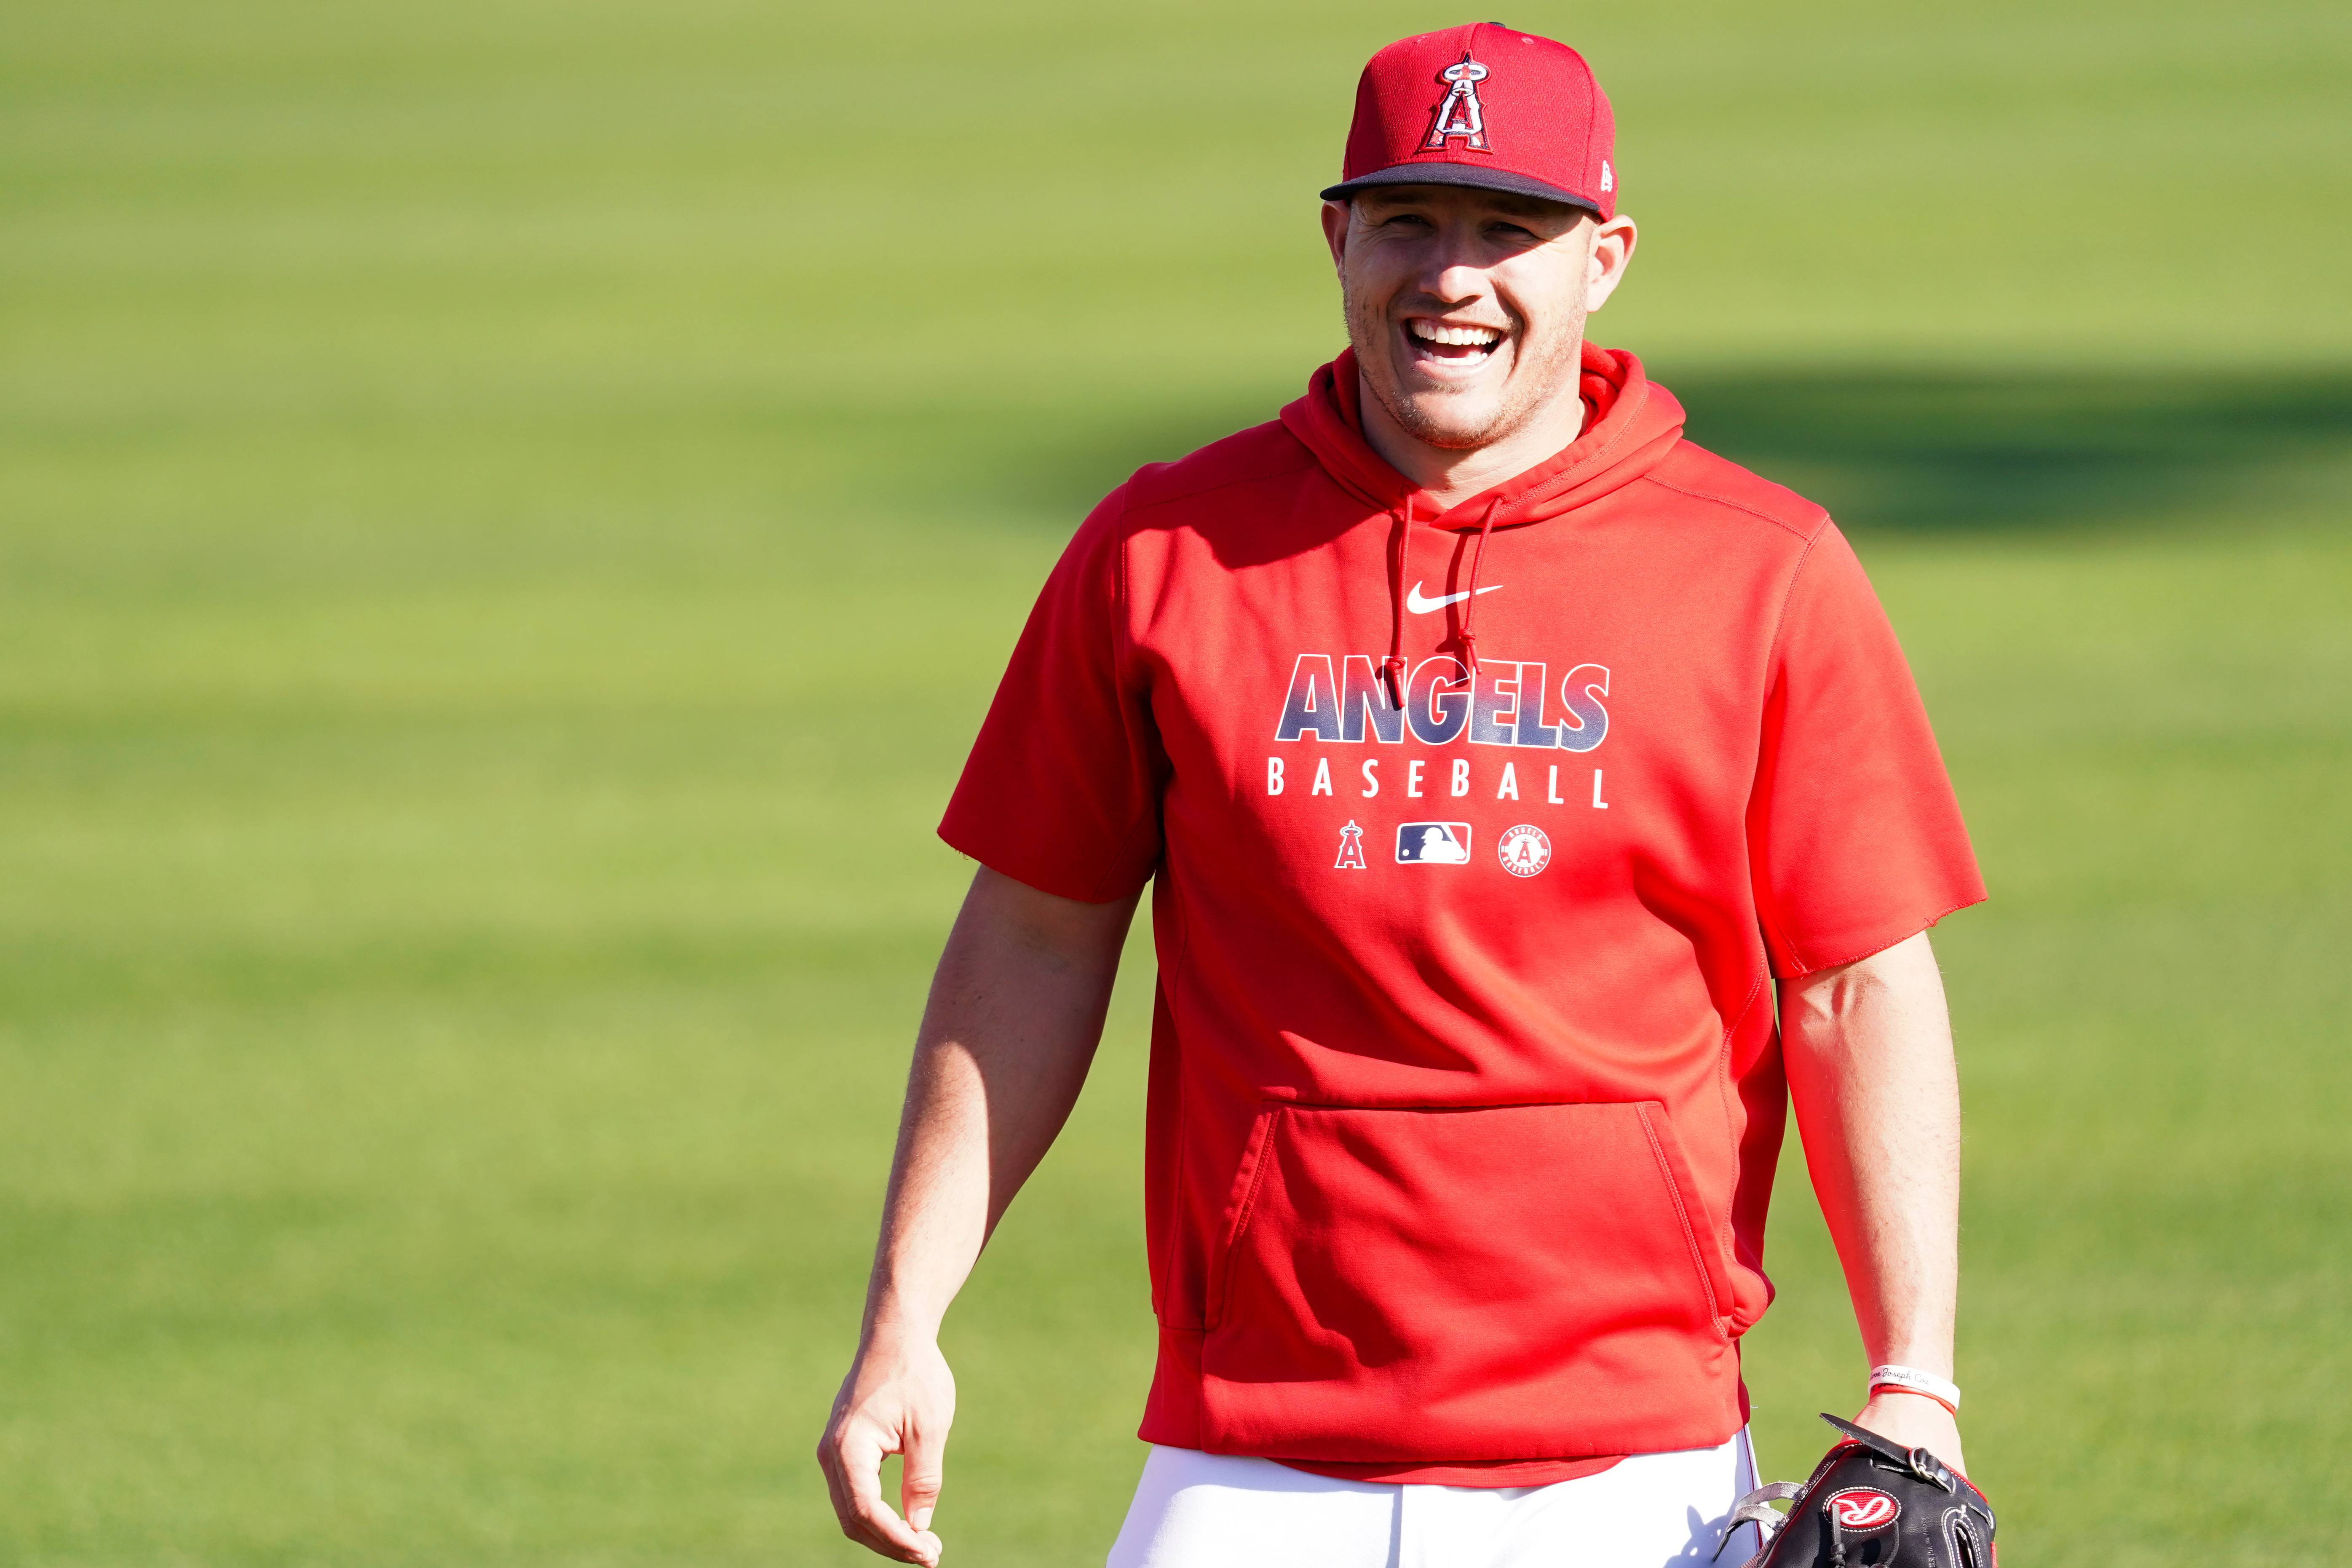 Mike Trout of the Los Angeles Angels smiles during a Los Angeles Angels Spring Training on February 27, 2020 in Tempe, Arizona.